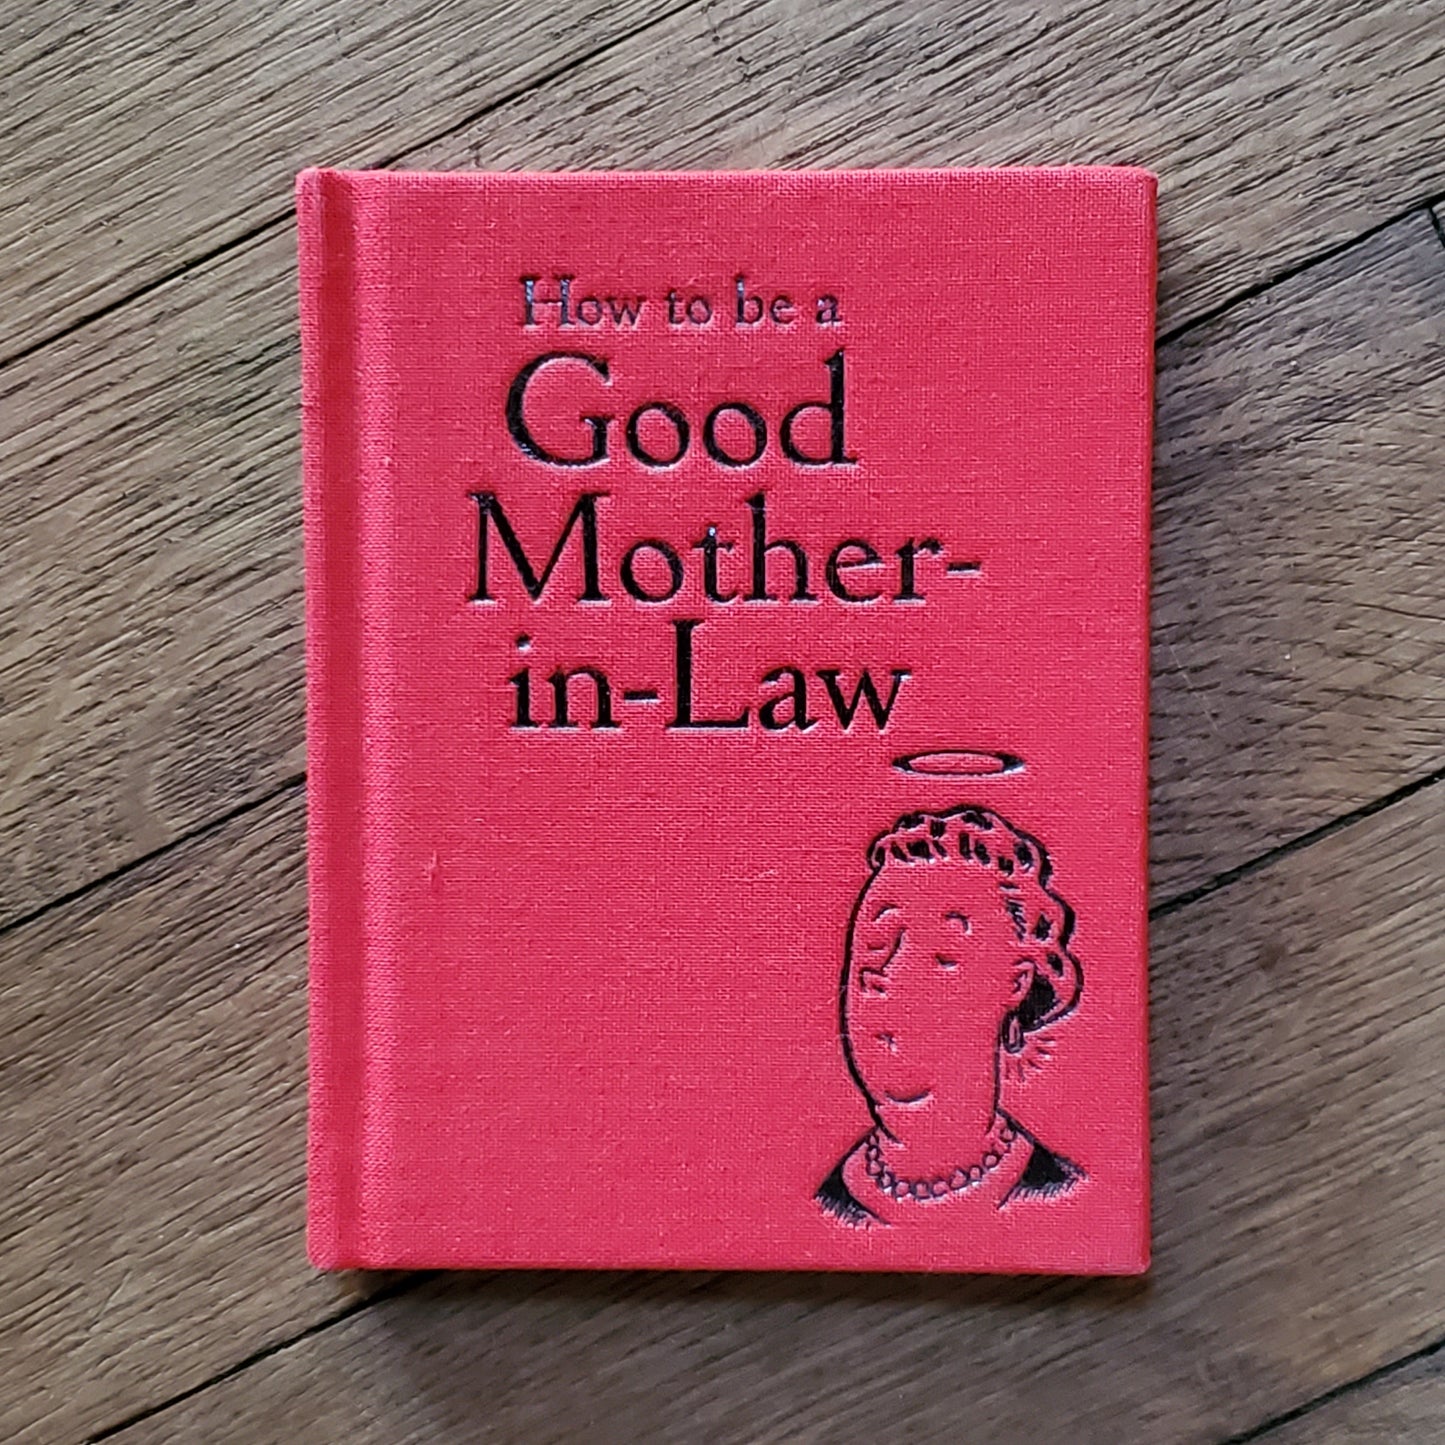 How to be a Good Mother- in-Law